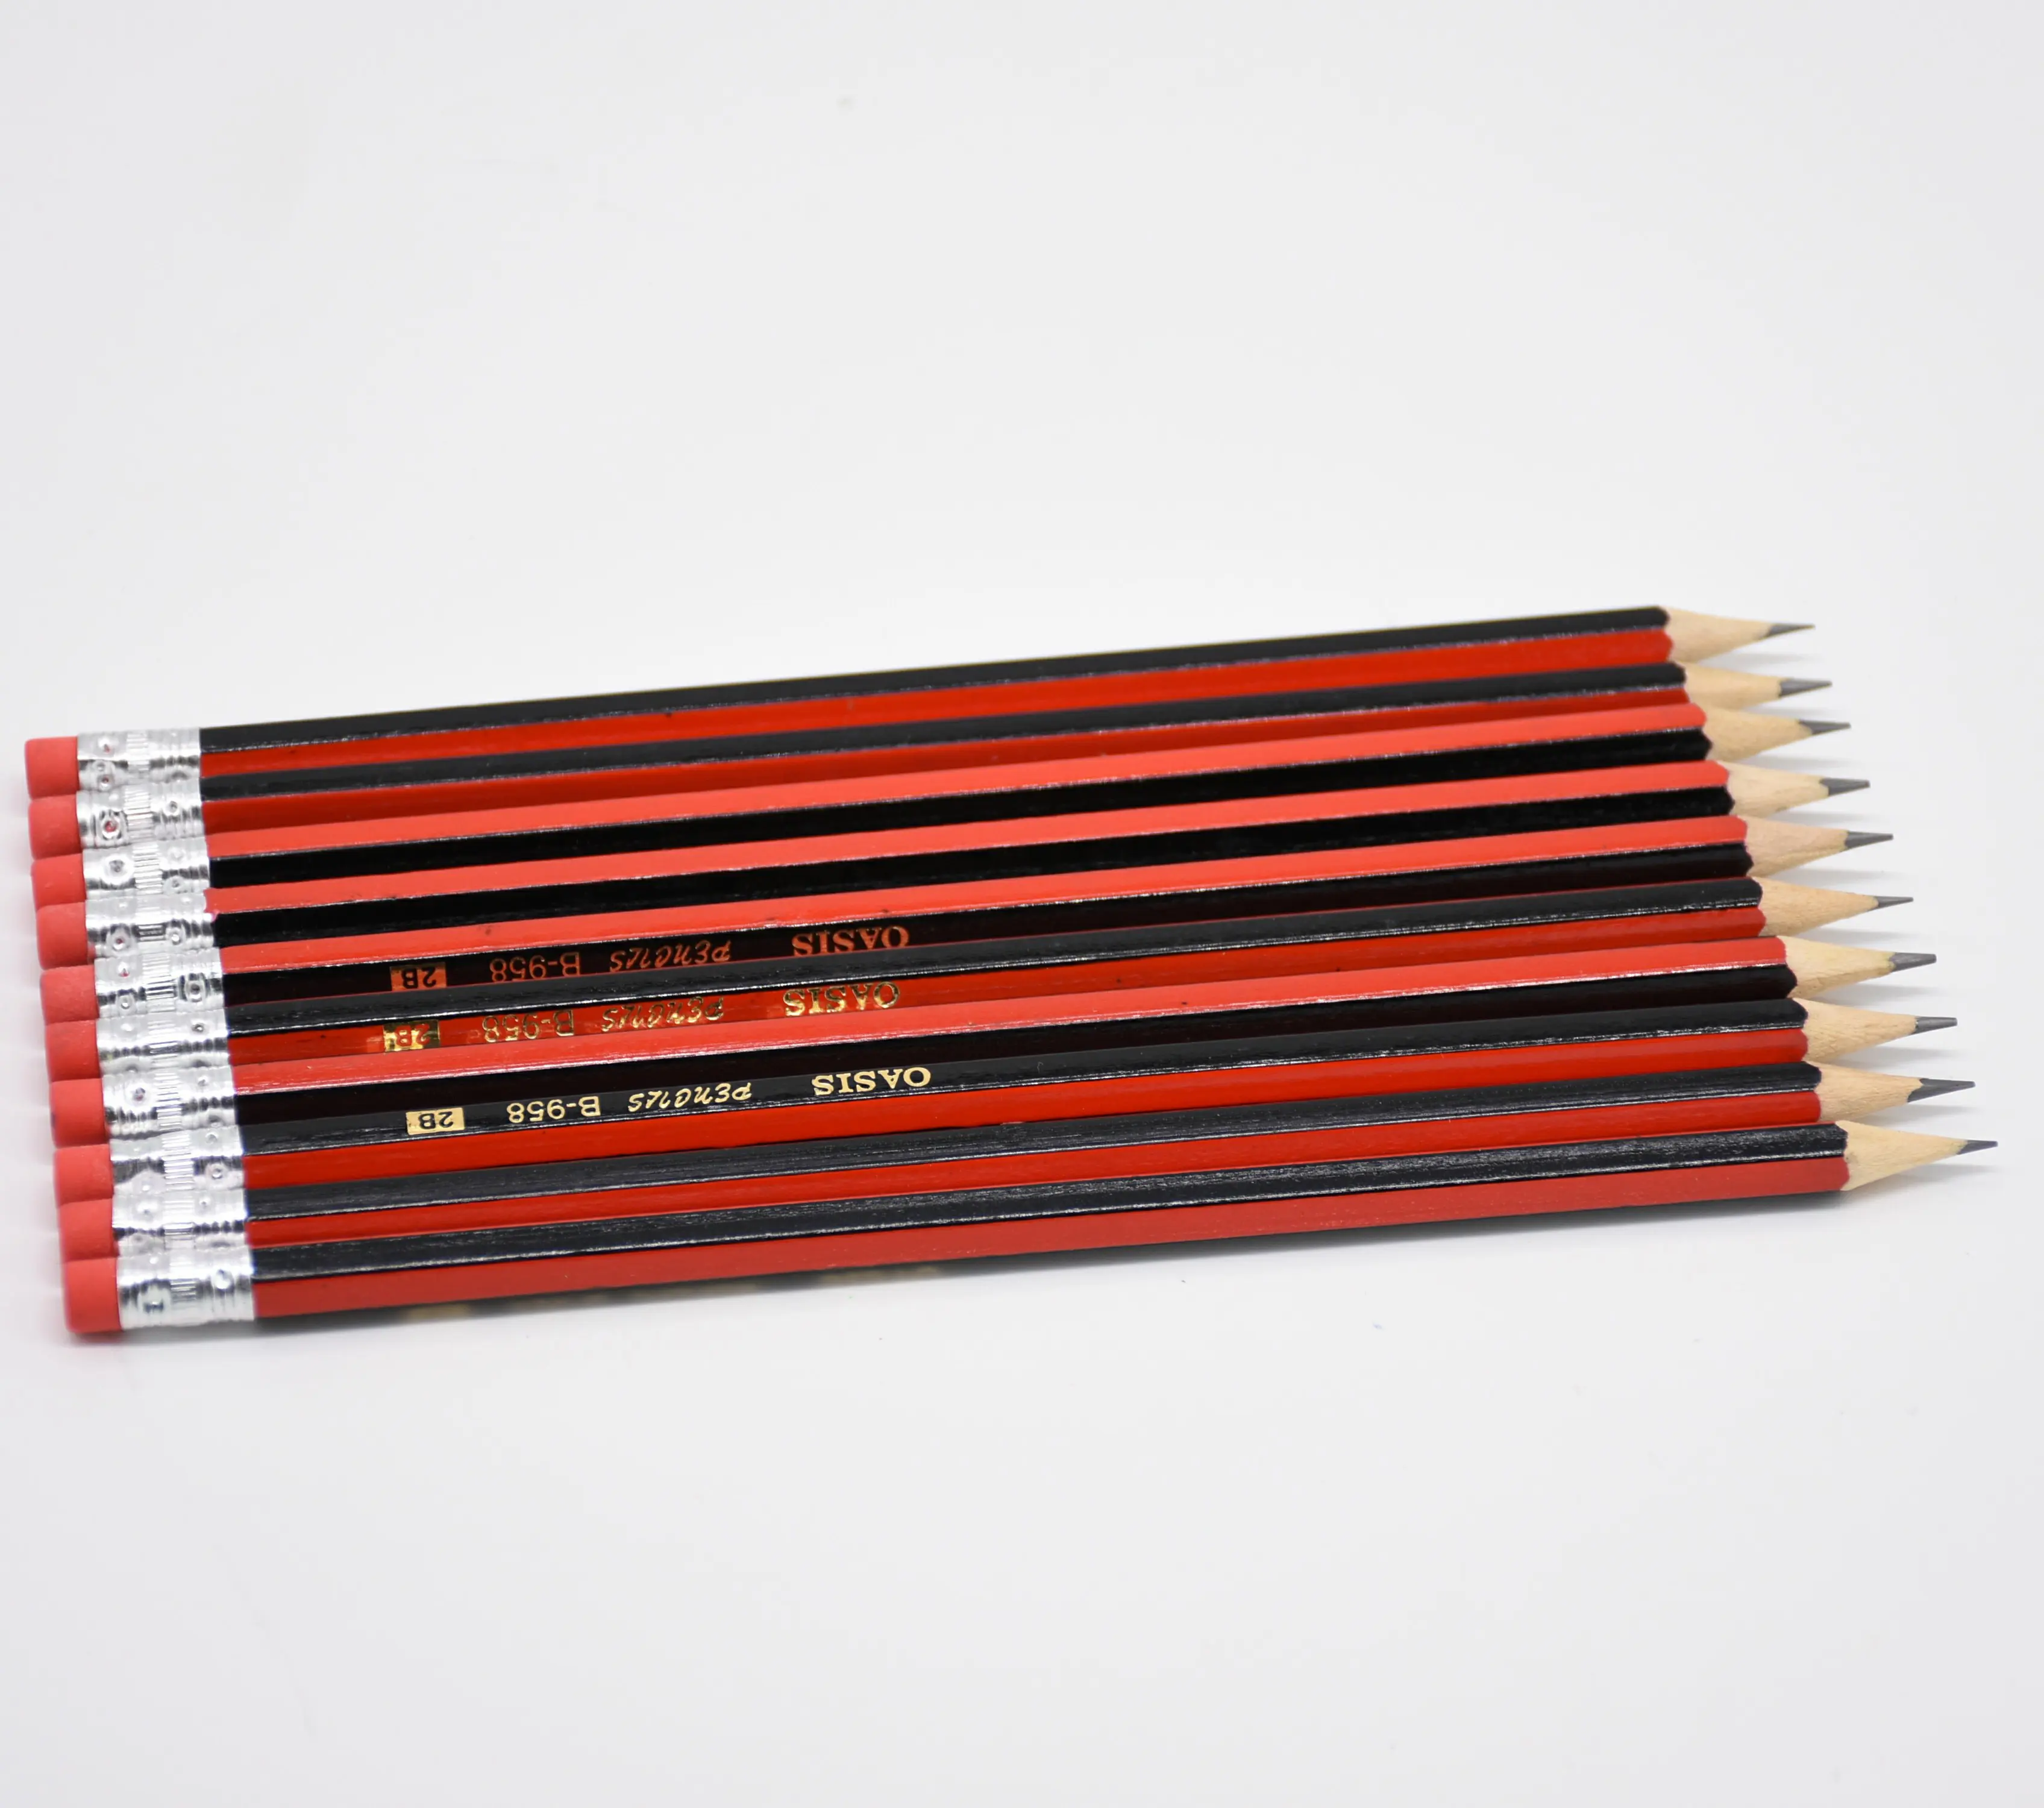 Black +Red Color Striped Wooden Pencil with eraser for school kids